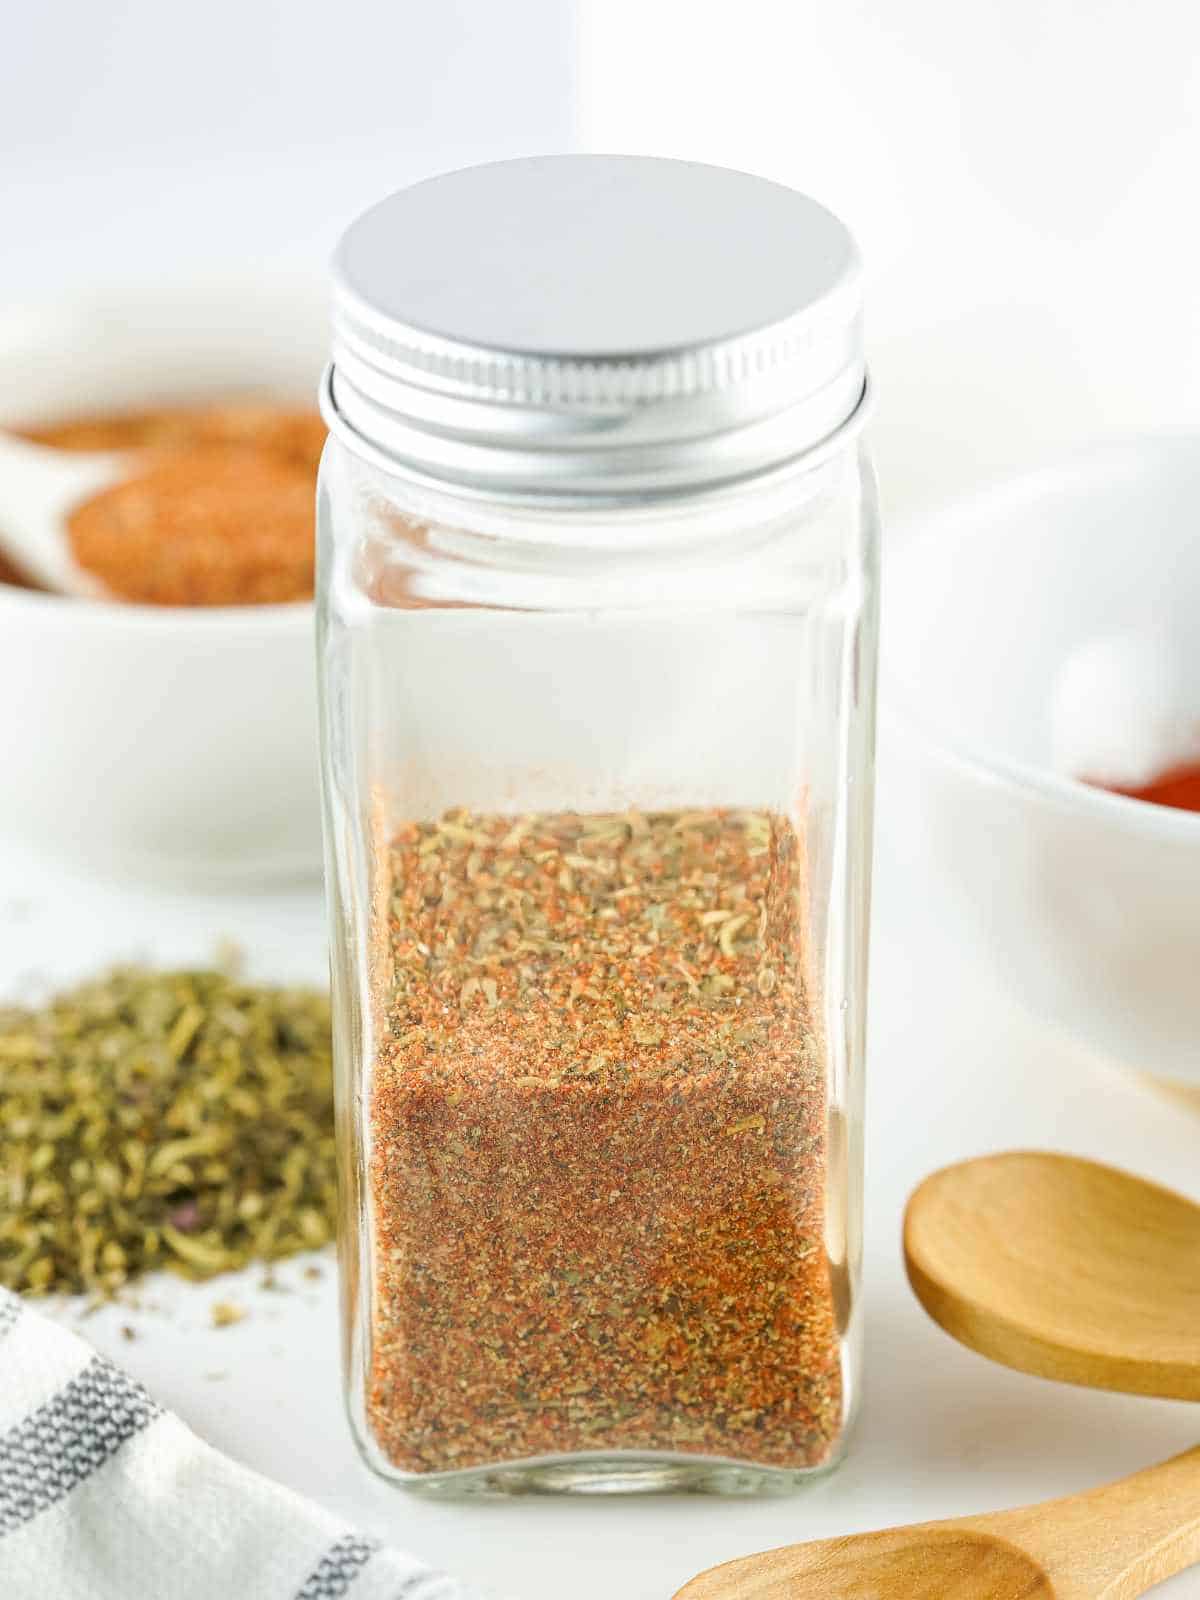 spice jar filled with spice blend.